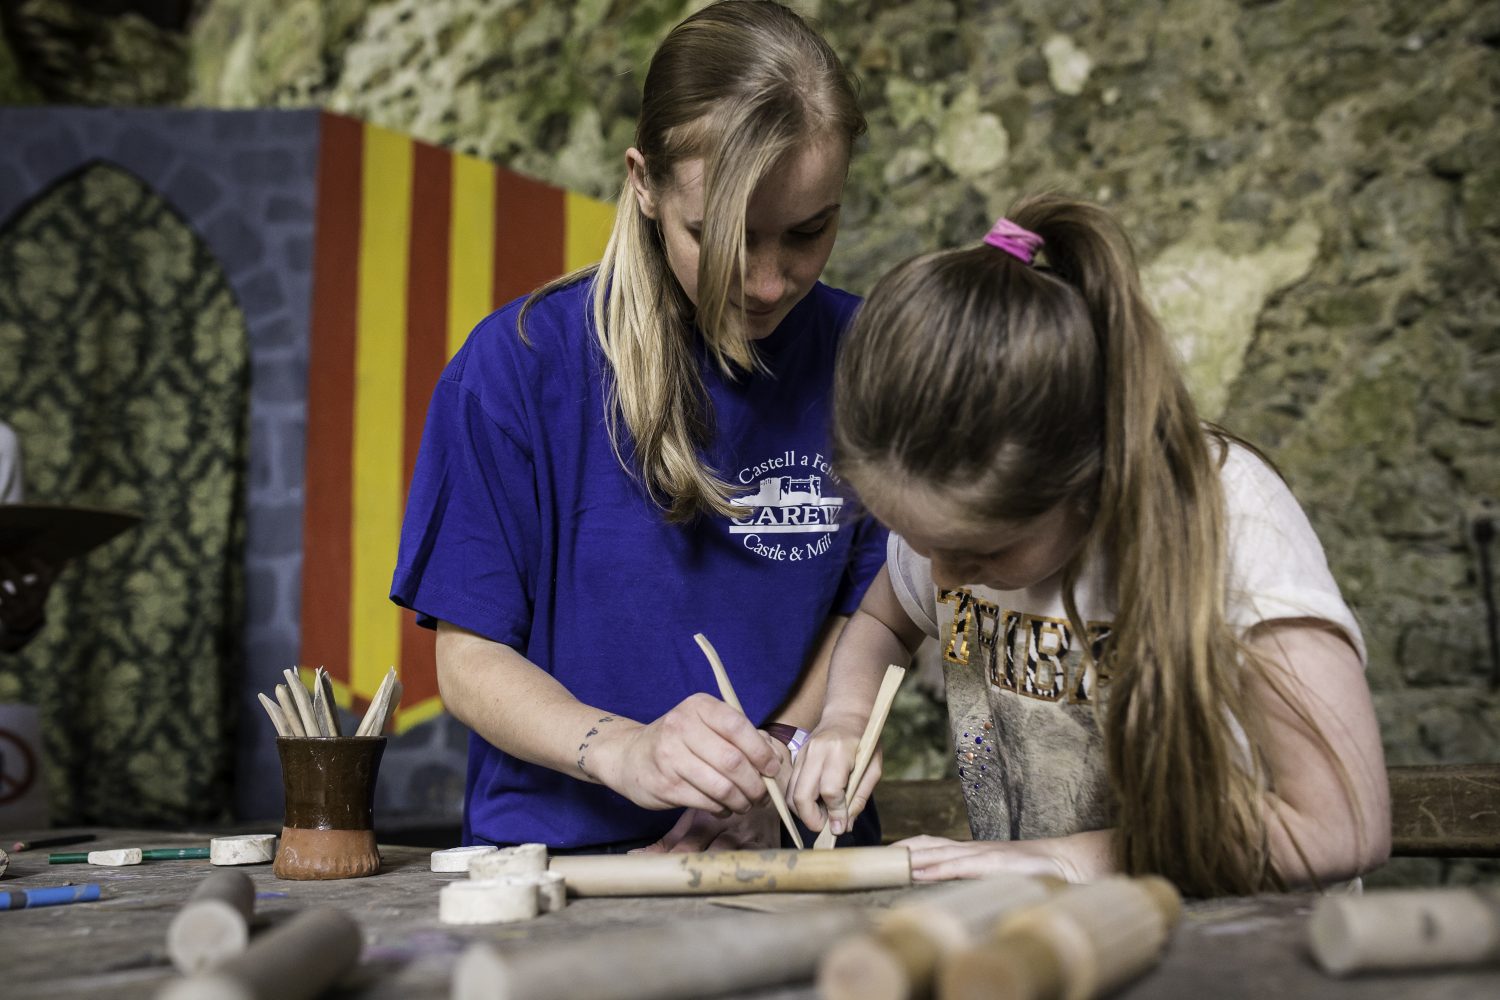 Art activity at Carew Castle and Tidal Mill, Pembrokeshire Coast National Park, Wales, UK